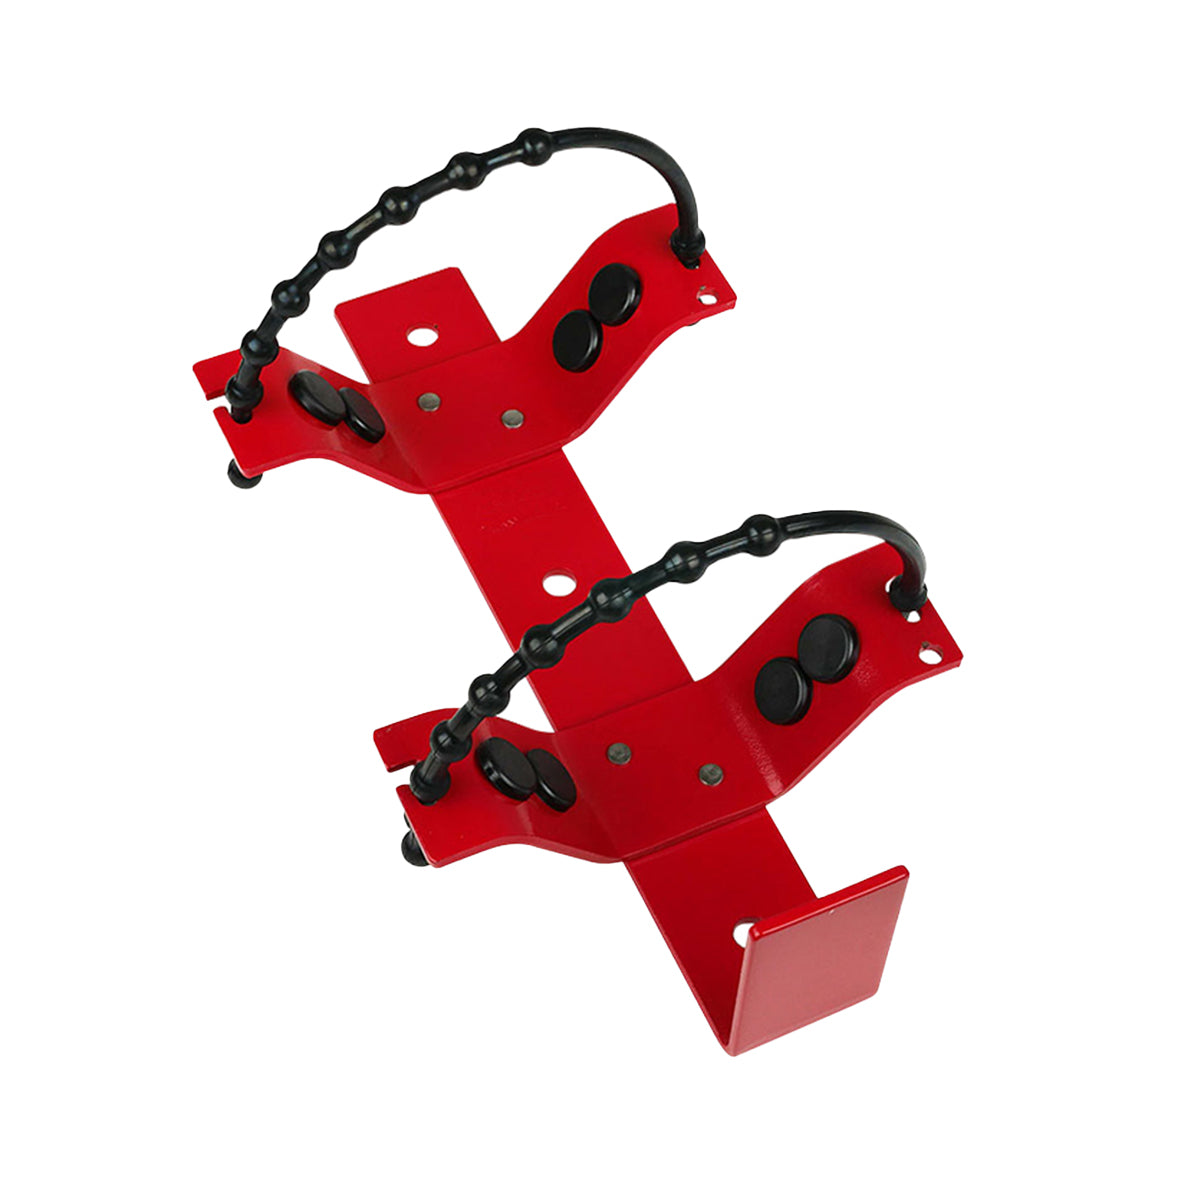 Metal rubber strap type vehicle bracket suits 4.5kg, powder coated red - Premium Heavy Duty Vehicle Brackets from Firebox - Shop now at Firebox Australia